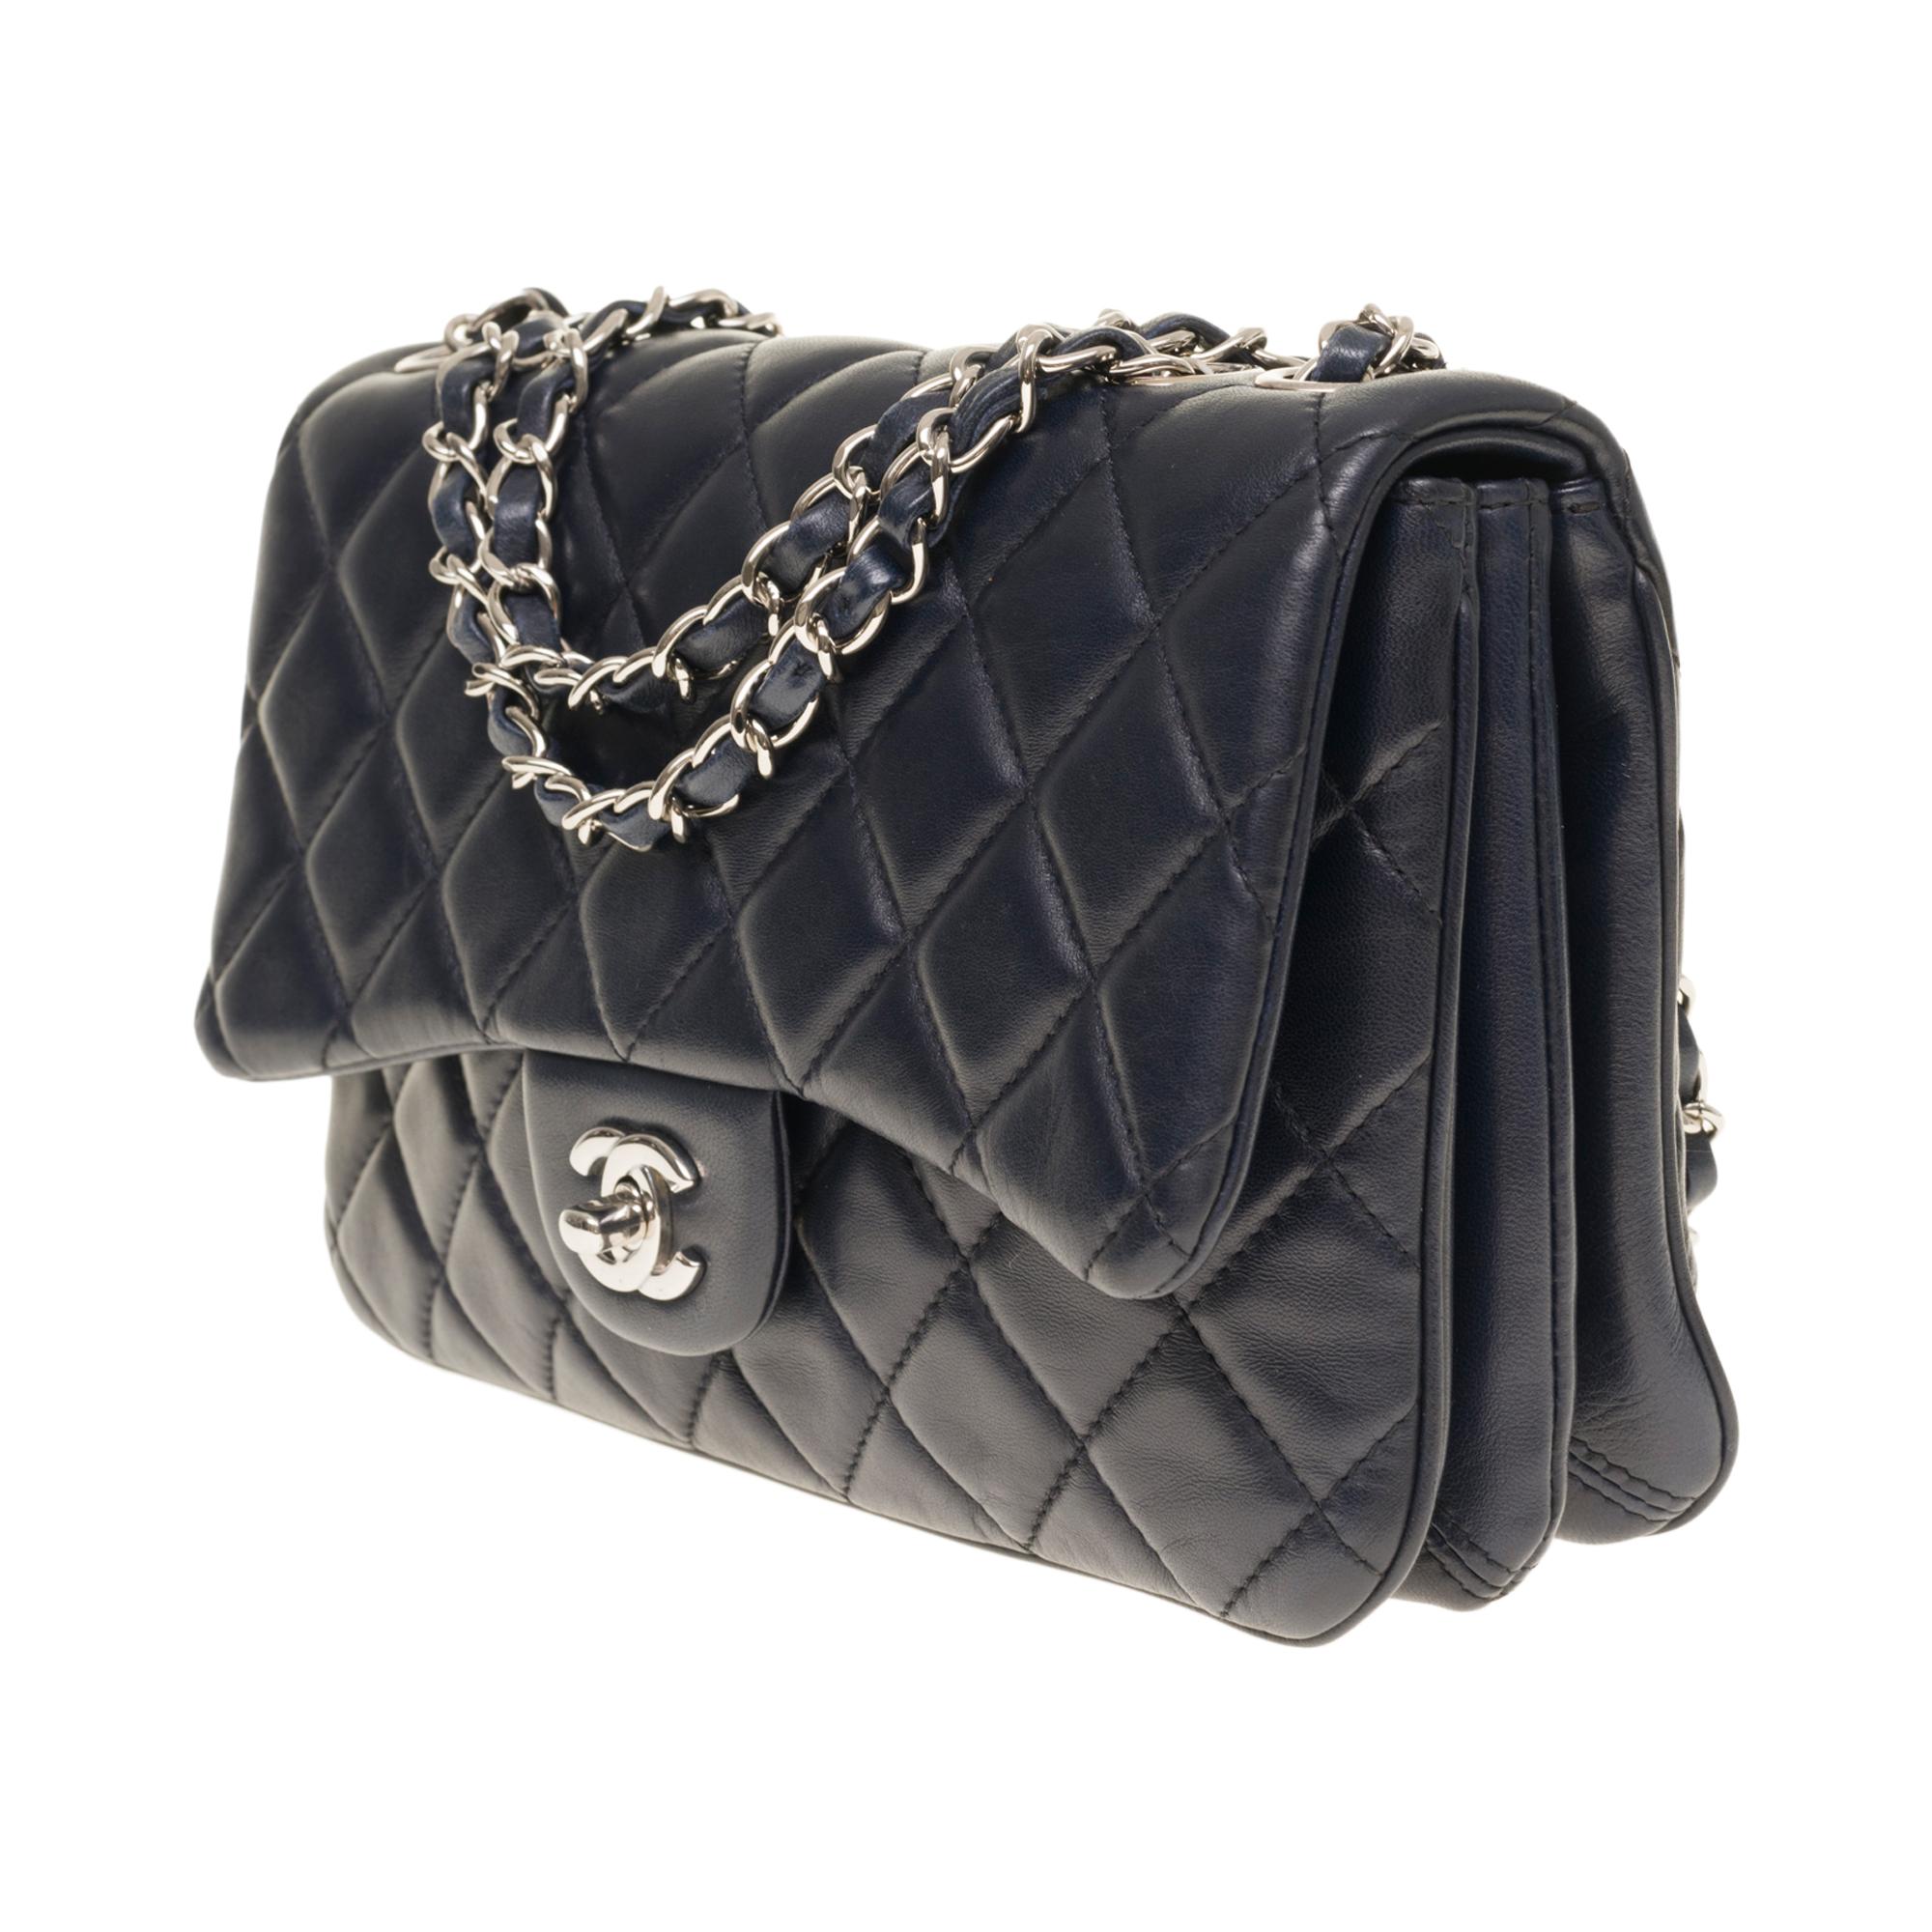 Black Chanel Classic shoulder bag in Navy blue quilted lambskin leather, SHW